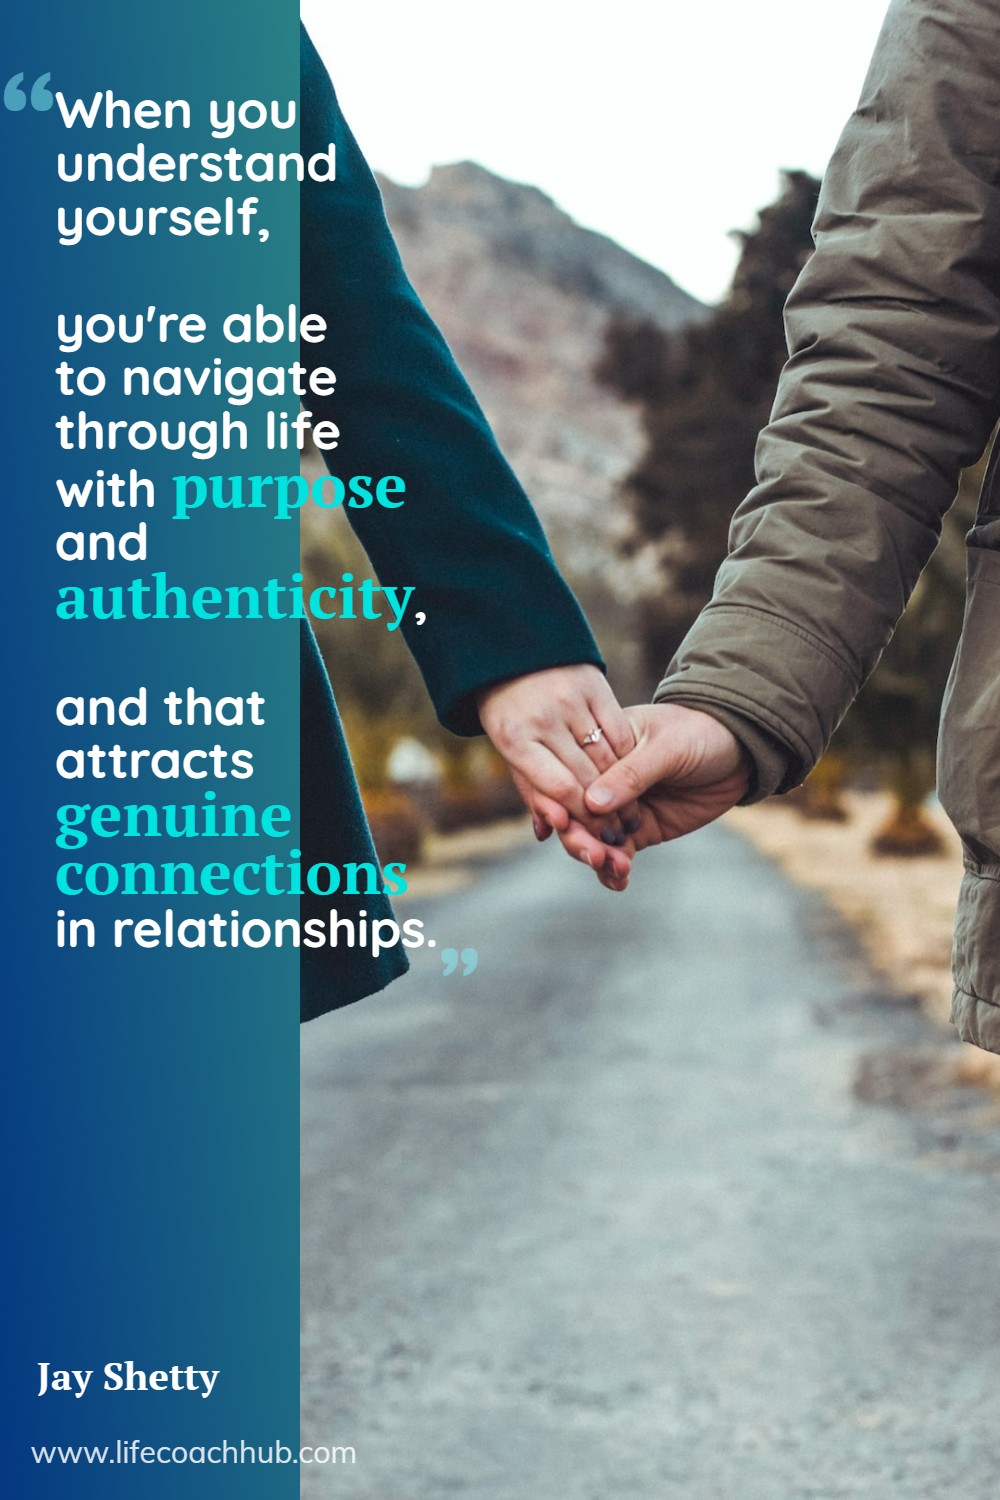 When you understand yourself, you're able to navigate through life with purpose and authenticity, and that attracts genuine connections in relationships. Jay Shetty Coaching Quote